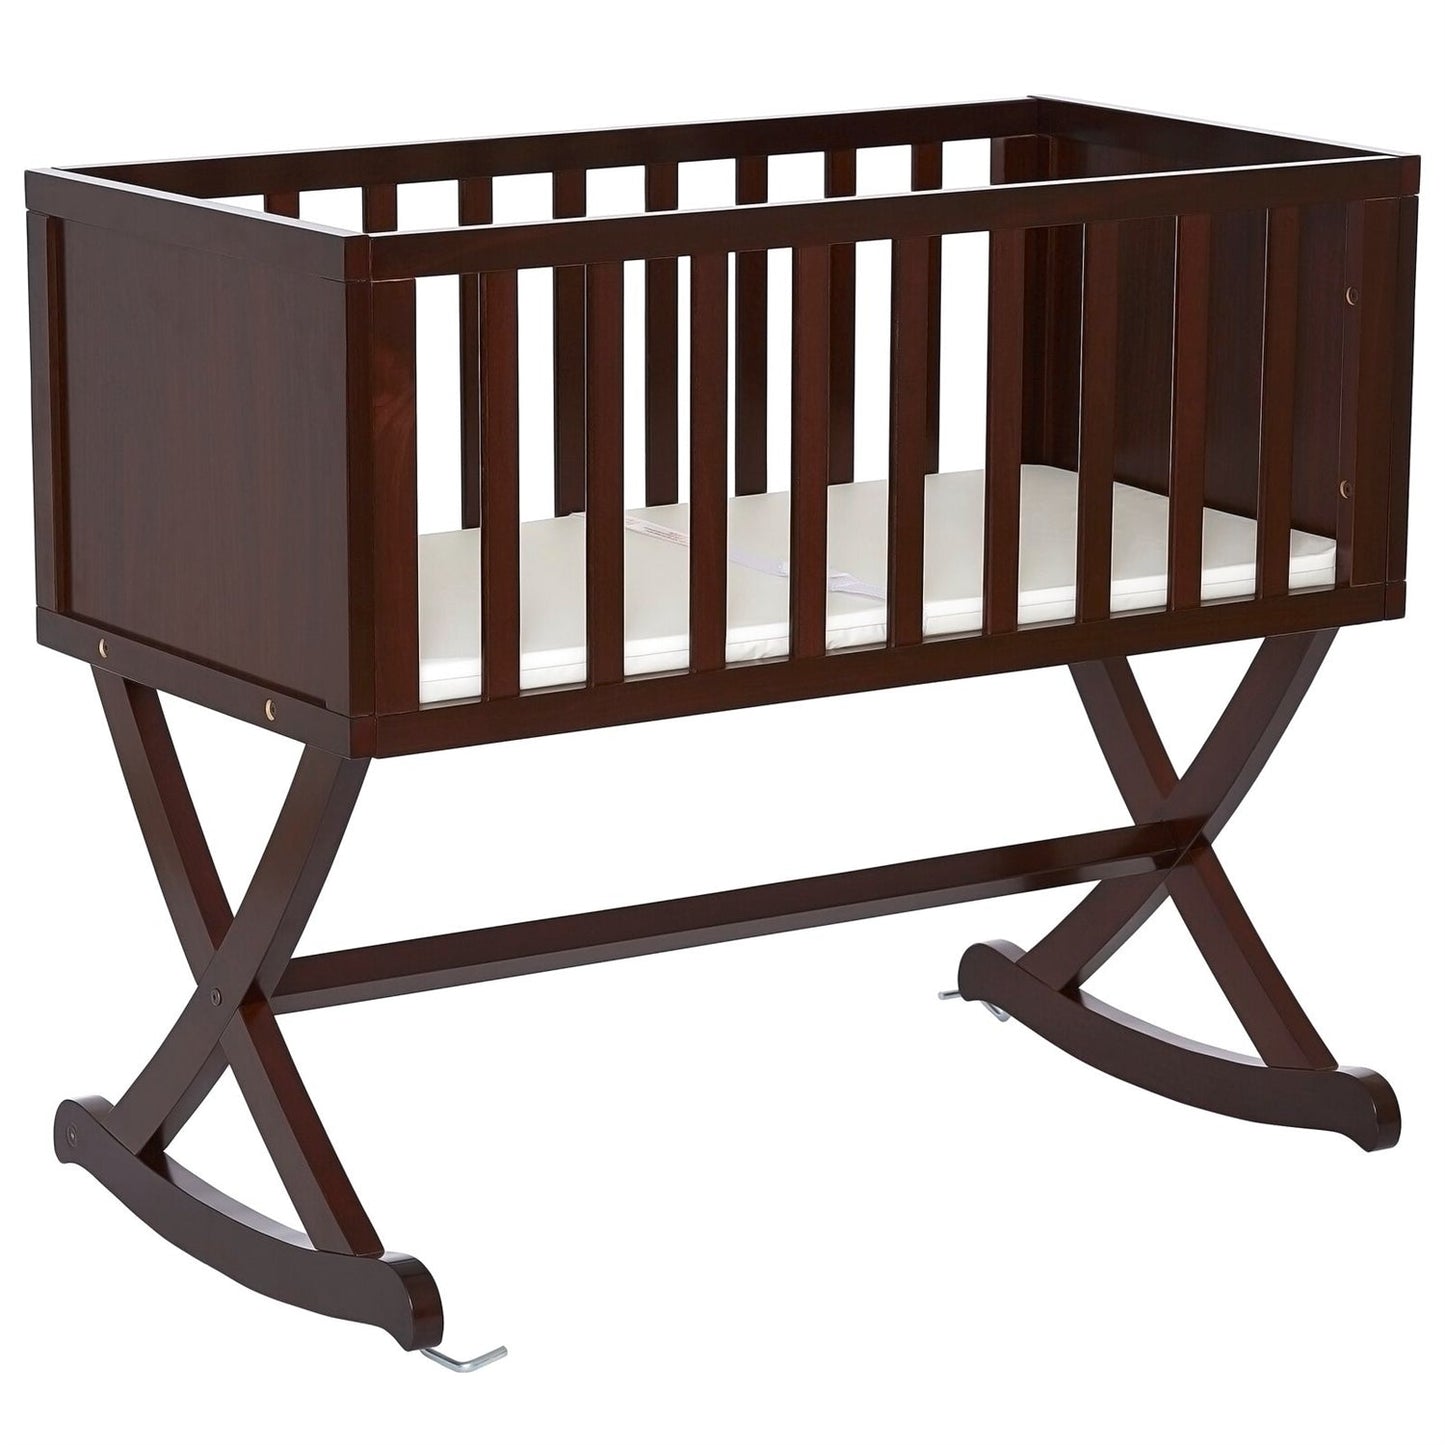 Bedroom > Baby & Kids - Solid Wood Rocking Baby Glider Cradle With Crib Mattress In Cherry Finish